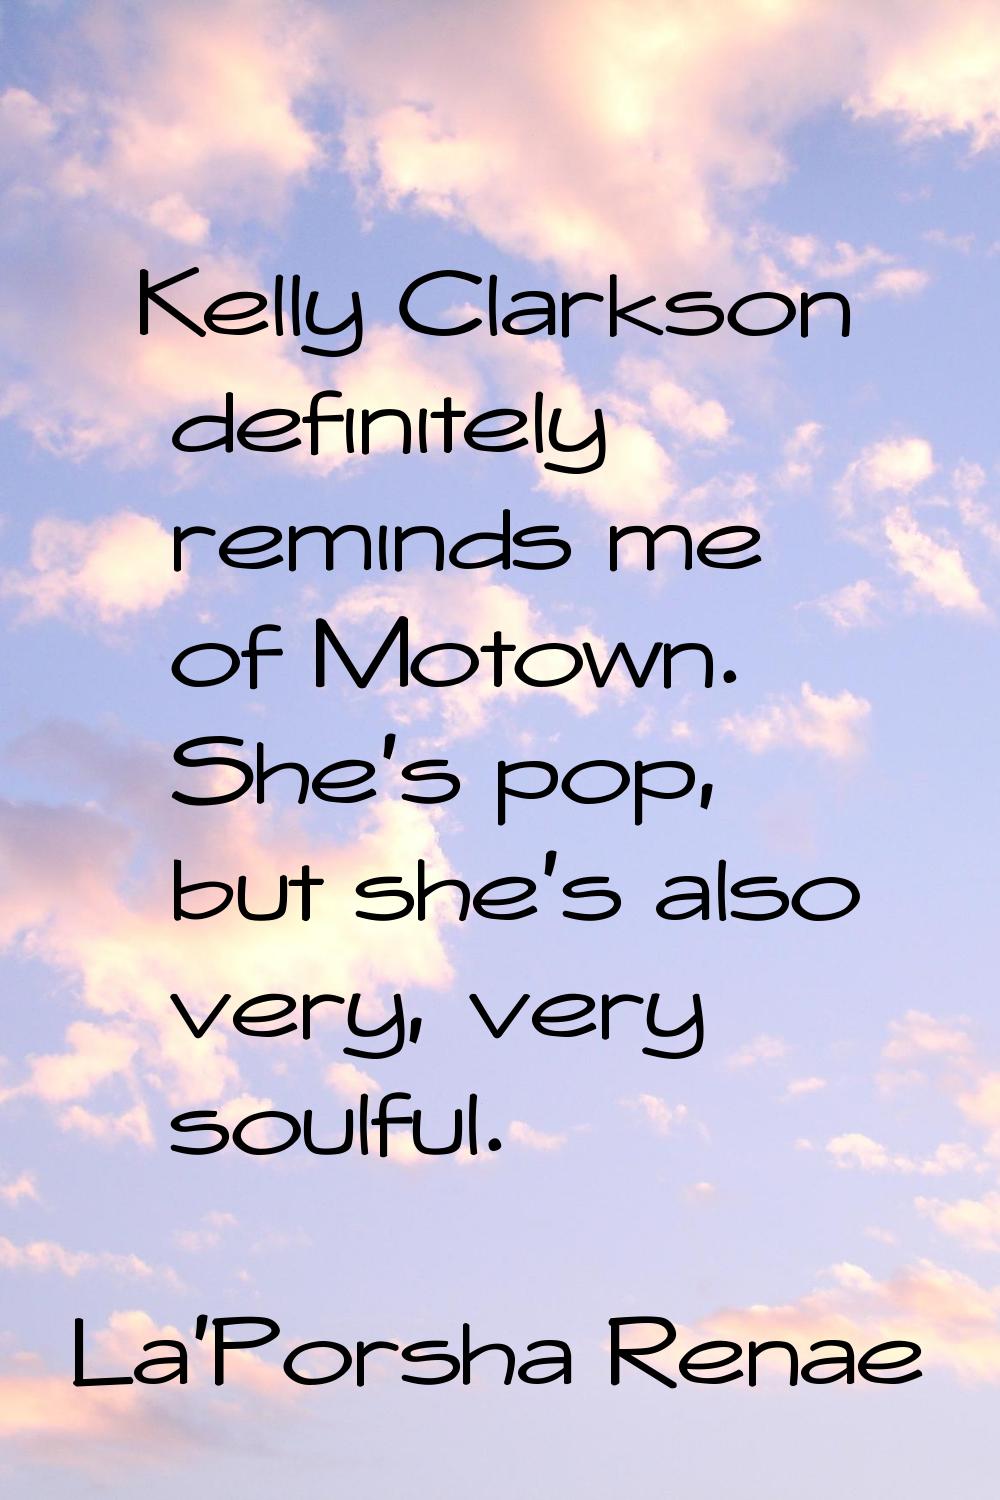 Kelly Clarkson definitely reminds me of Motown. She's pop, but she's also very, very soulful.